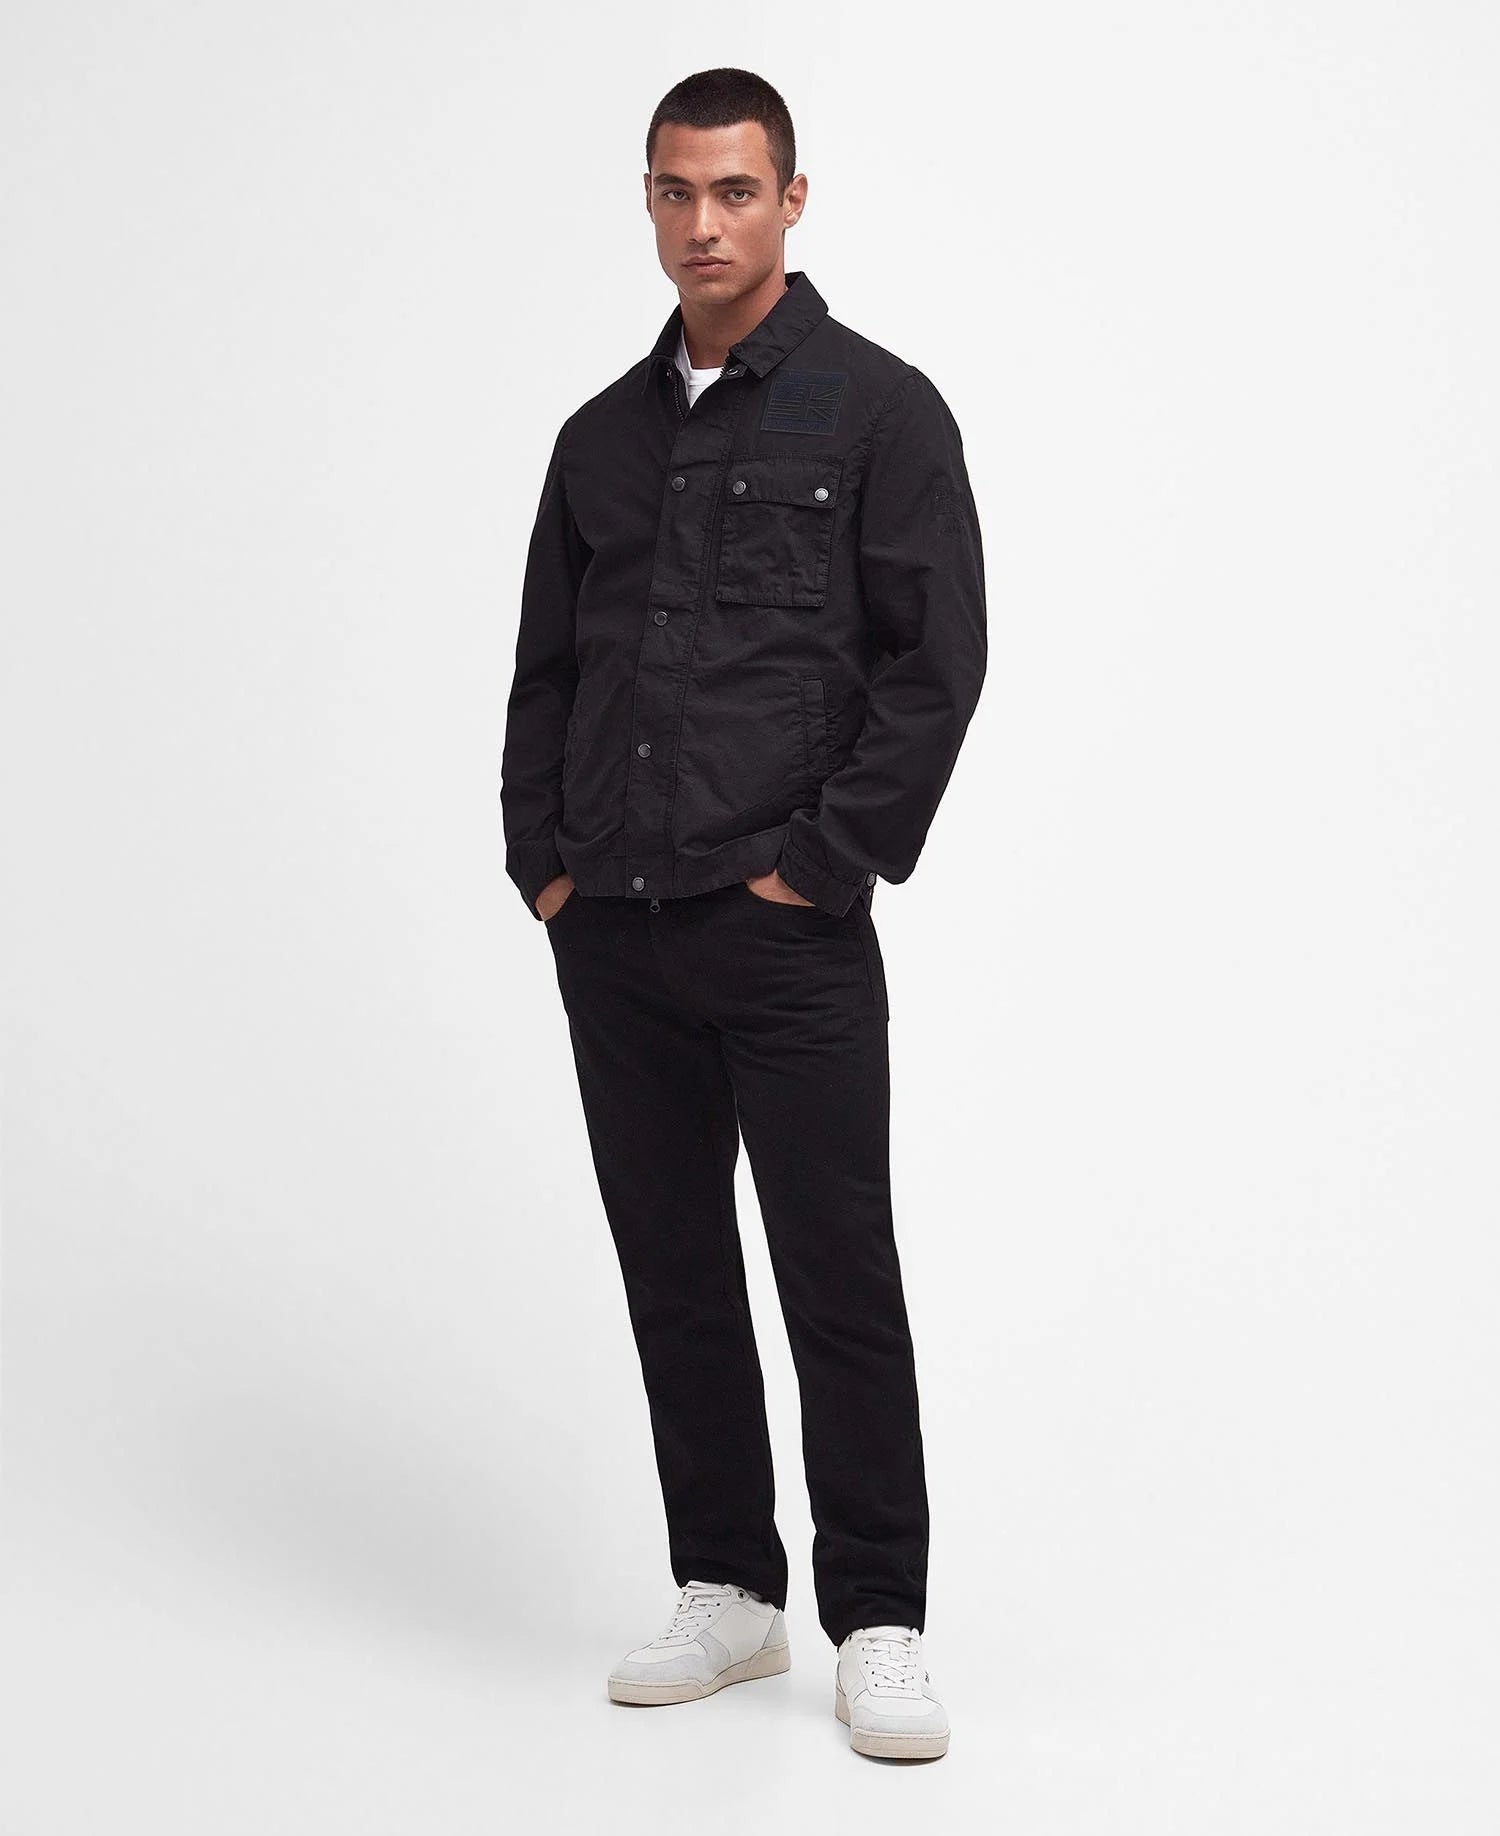 Barbour International SMQ Workers Casual Jacket - Black